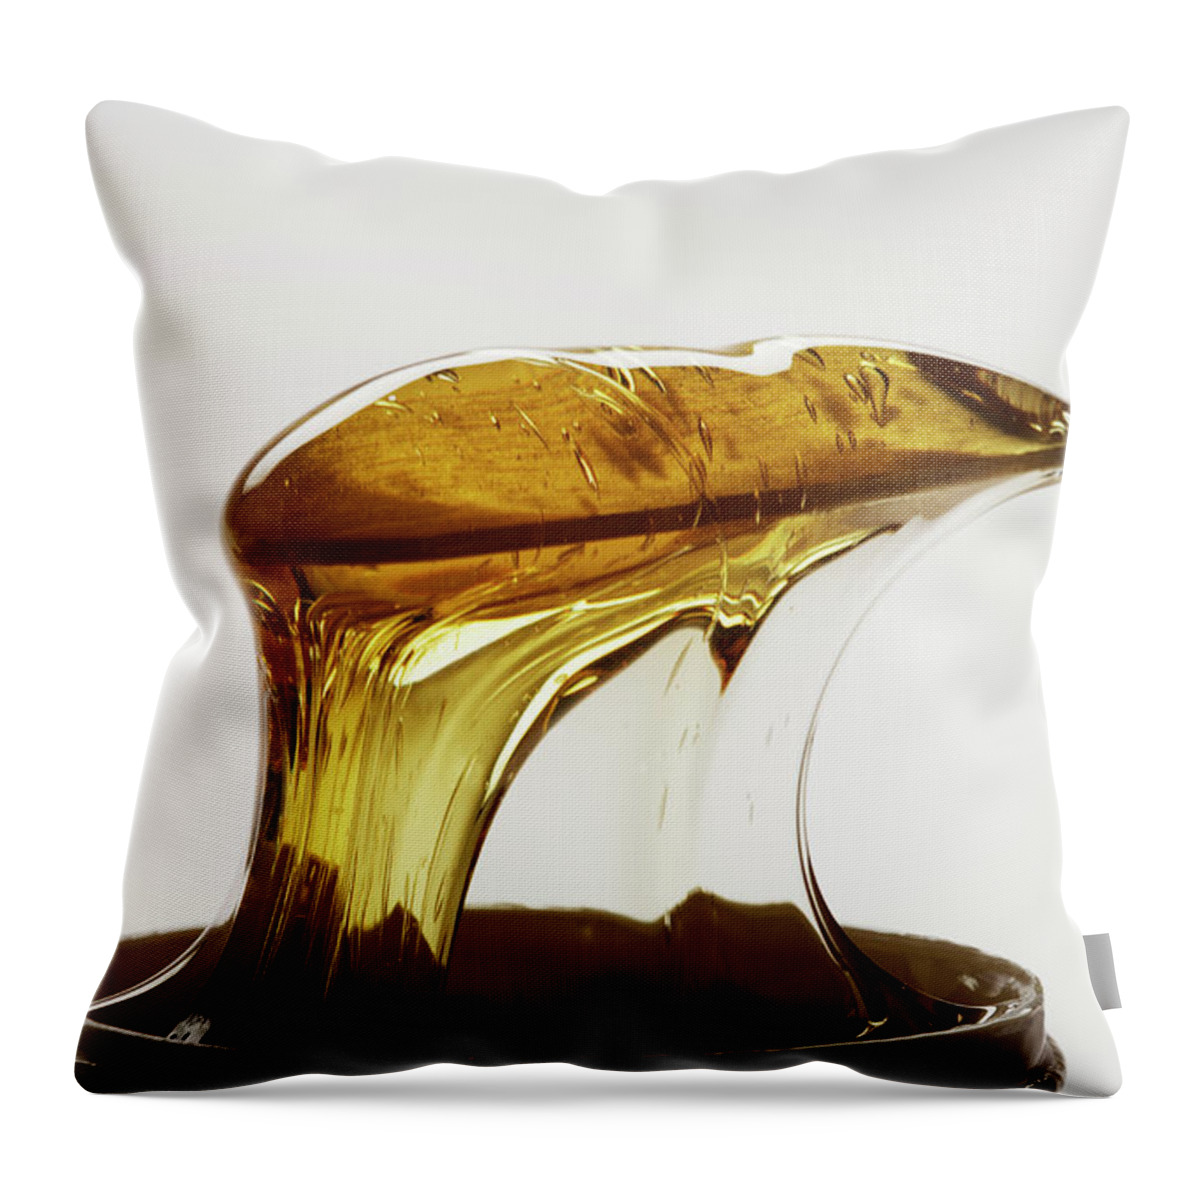 White Background Throw Pillow featuring the photograph Body Wax by Monica Rodriguez